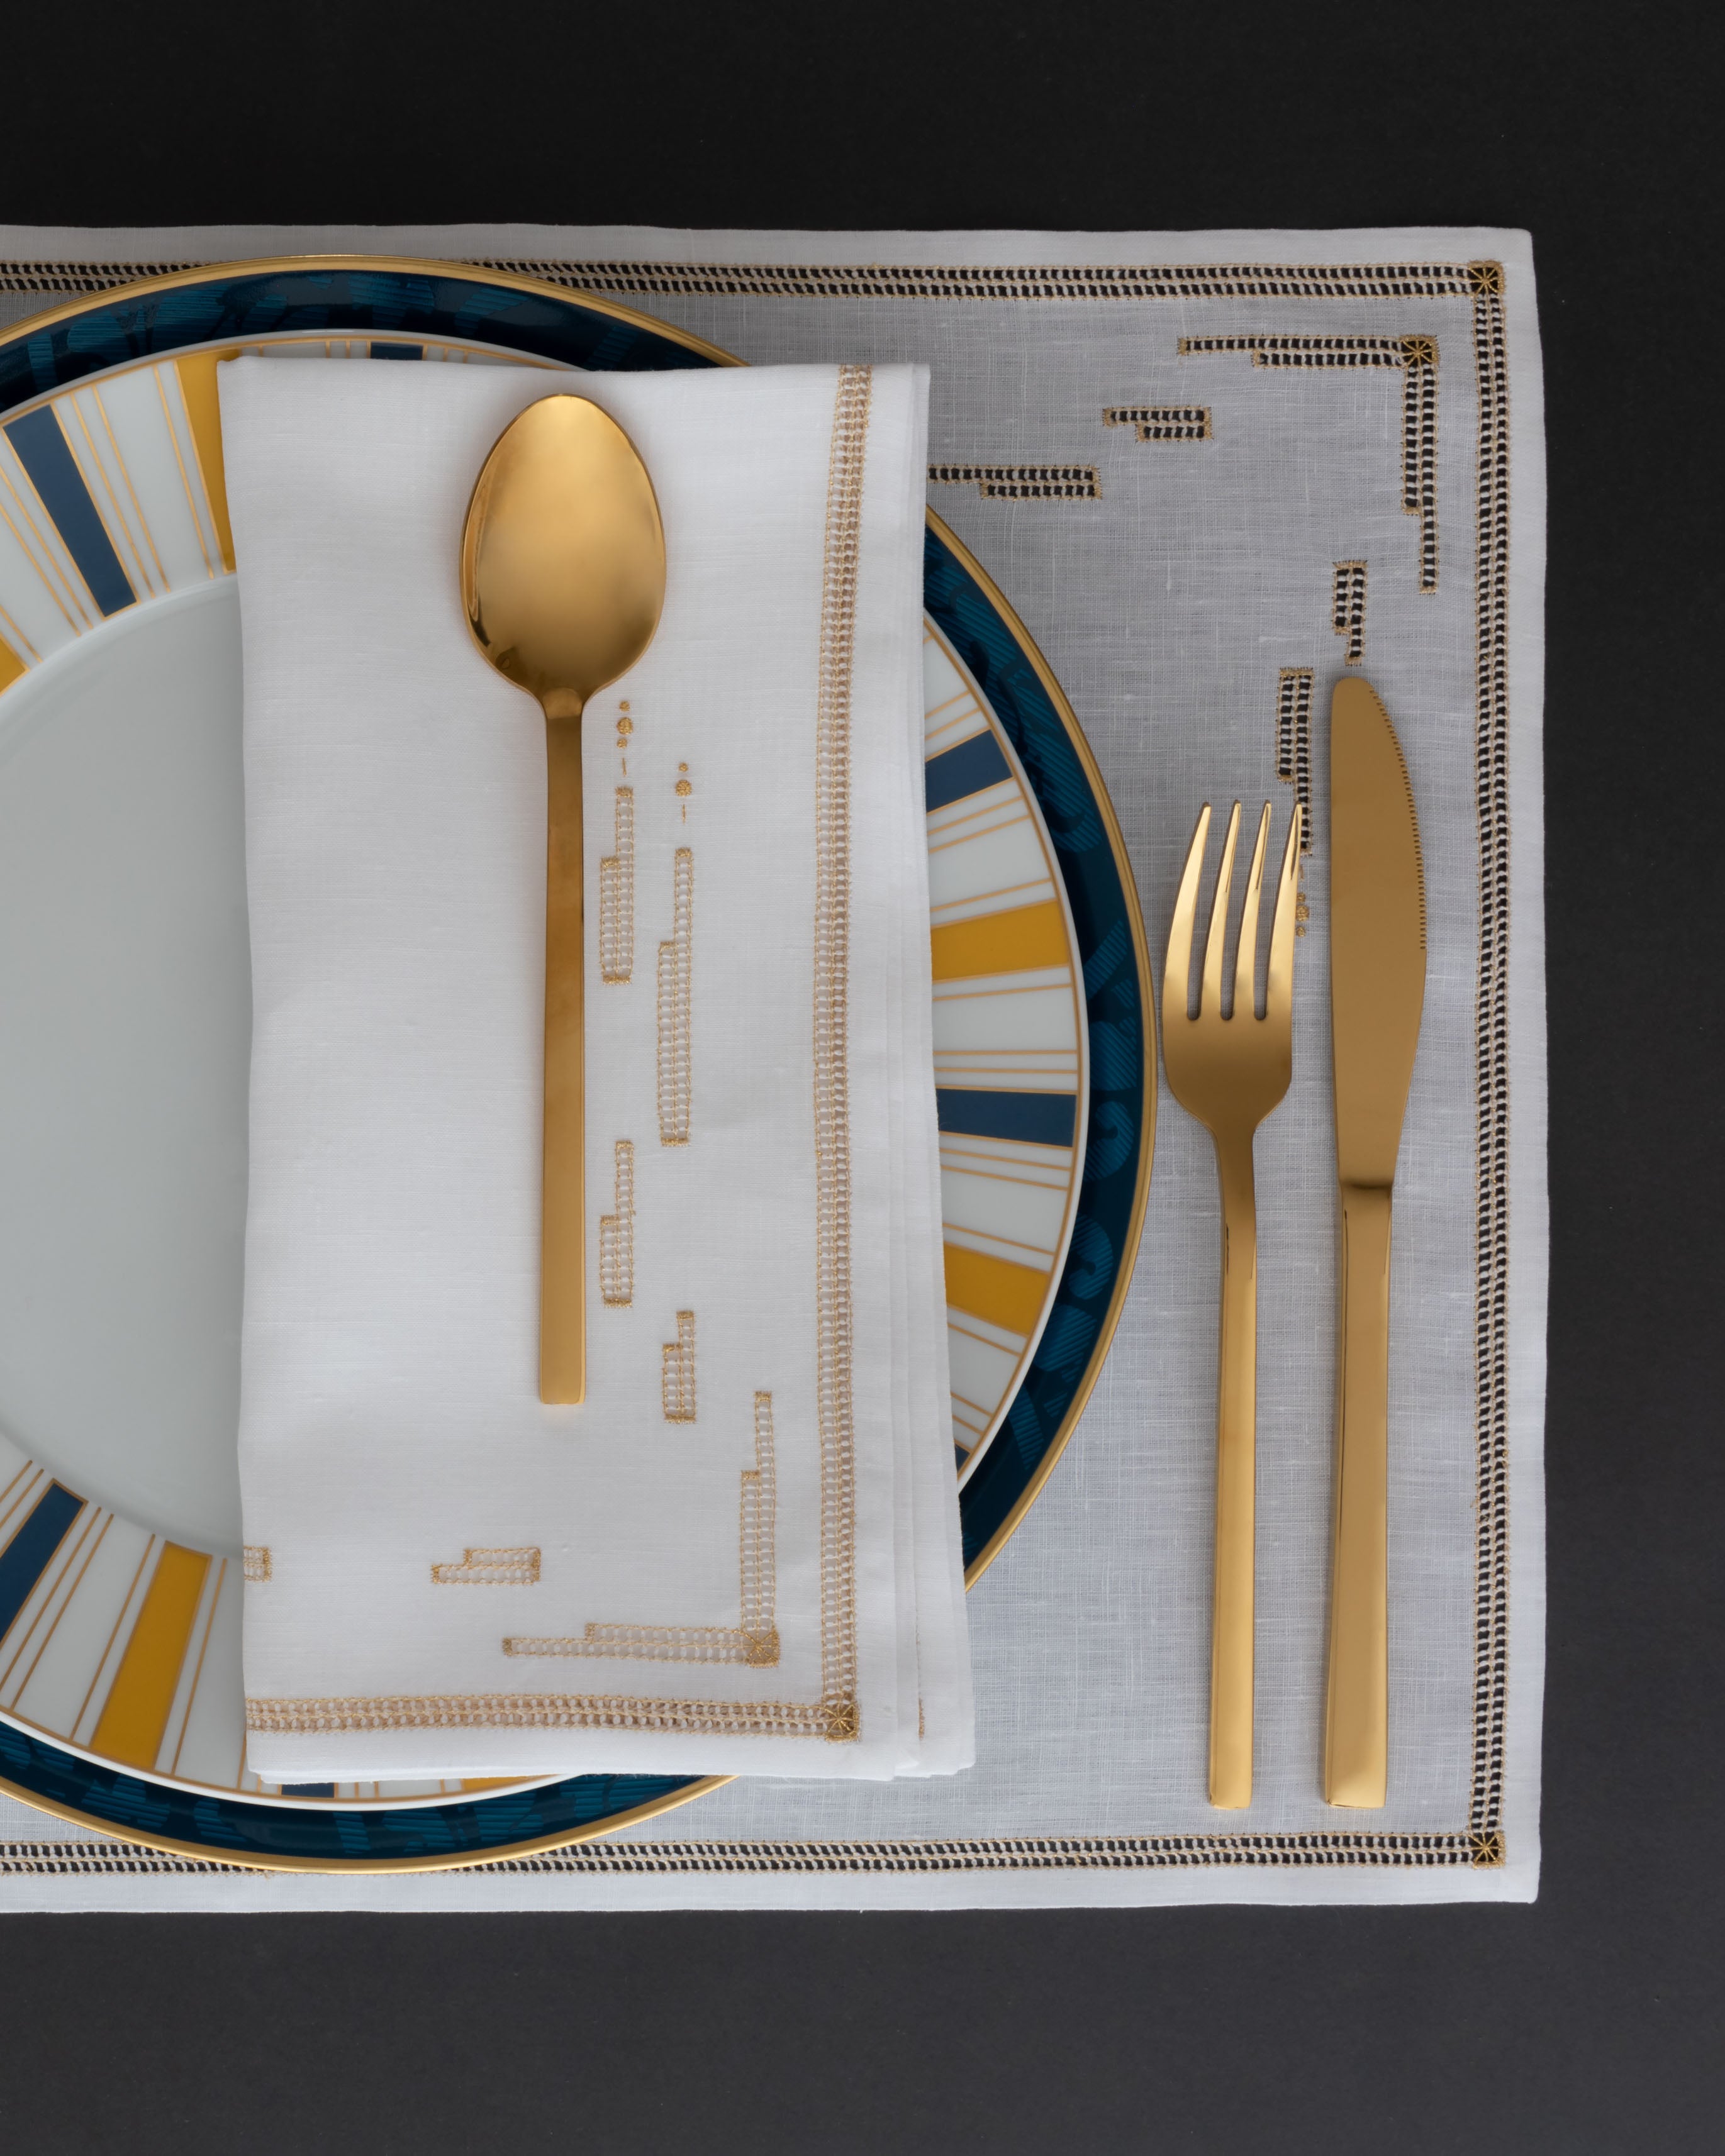 Patricia Napkin & Placemat in Gold